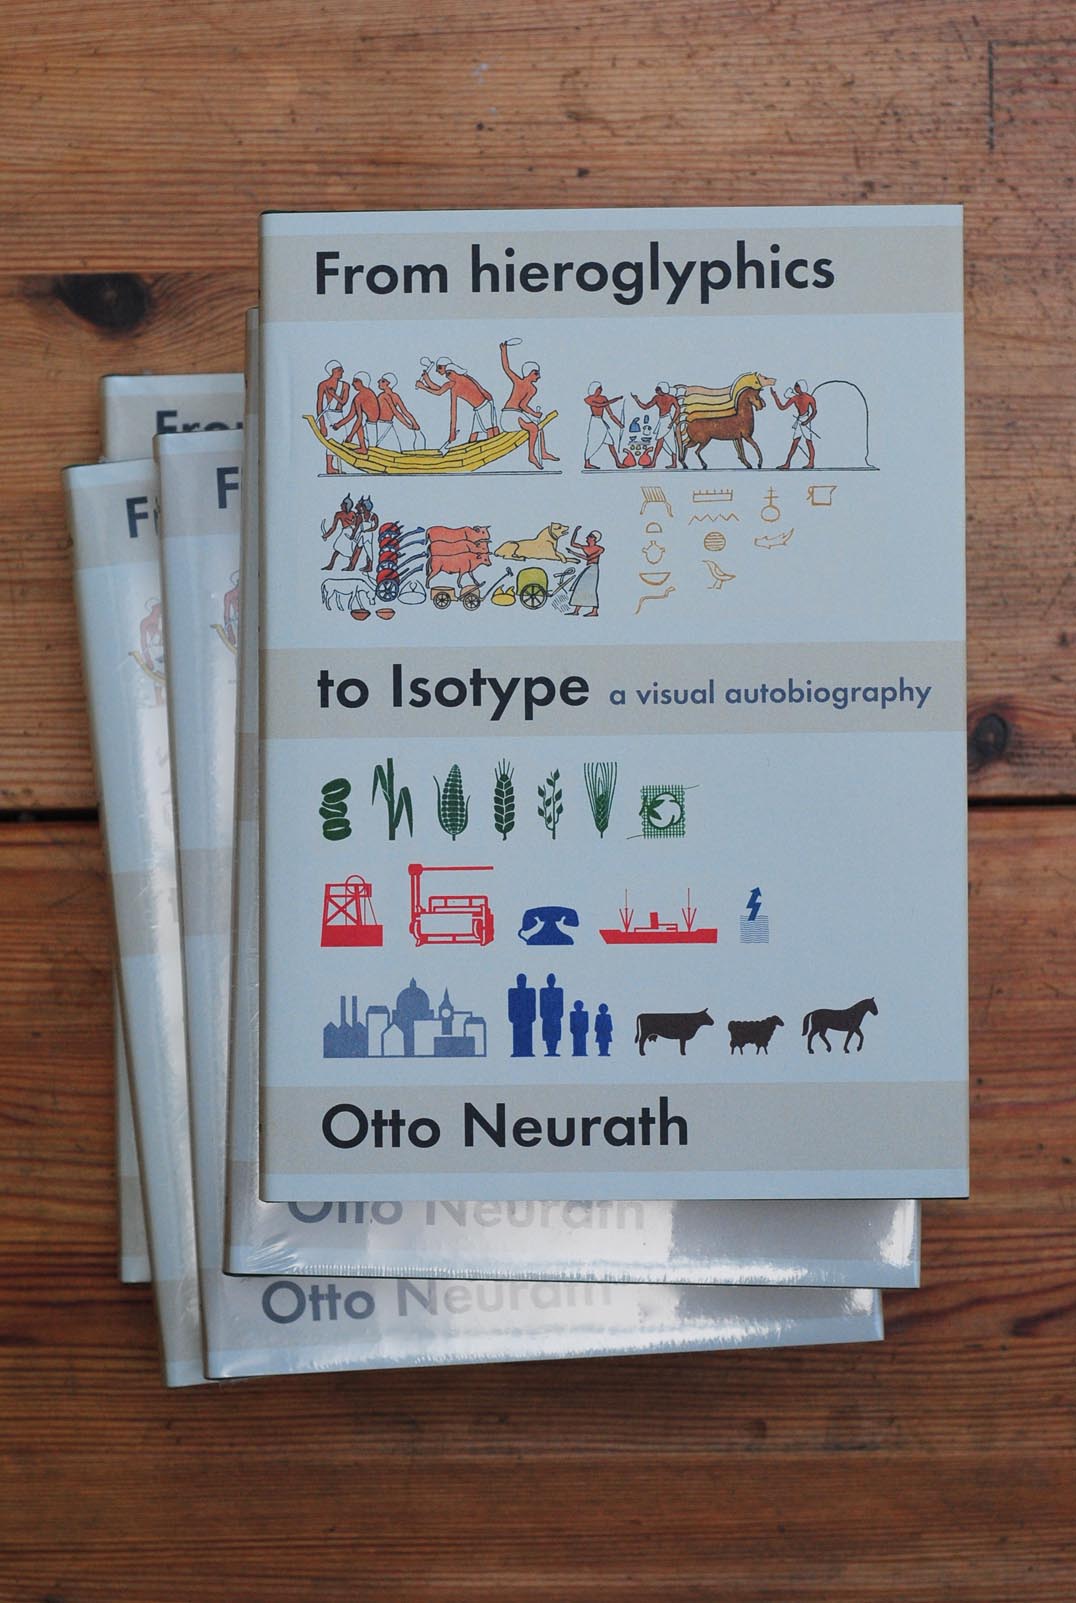 ‘From hieroglyphics to Isotype’ arrived